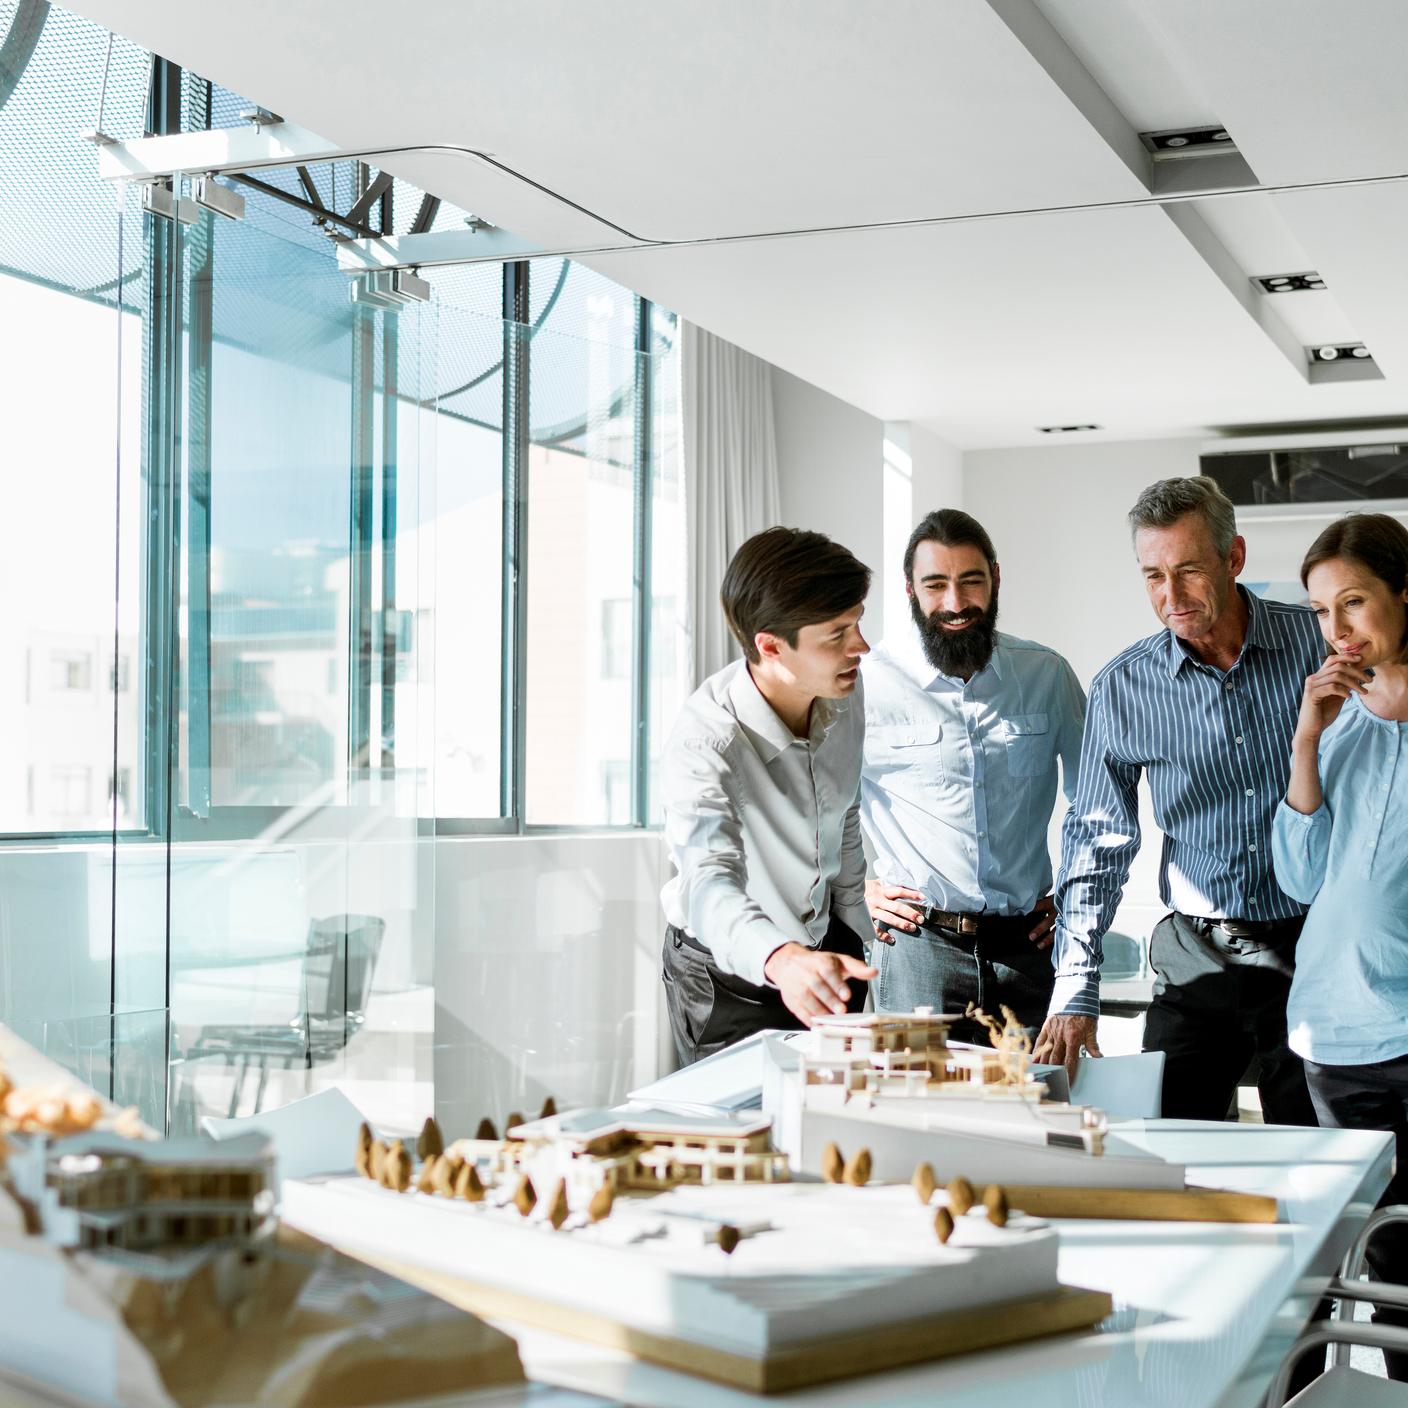 Team of architects examining model in board room